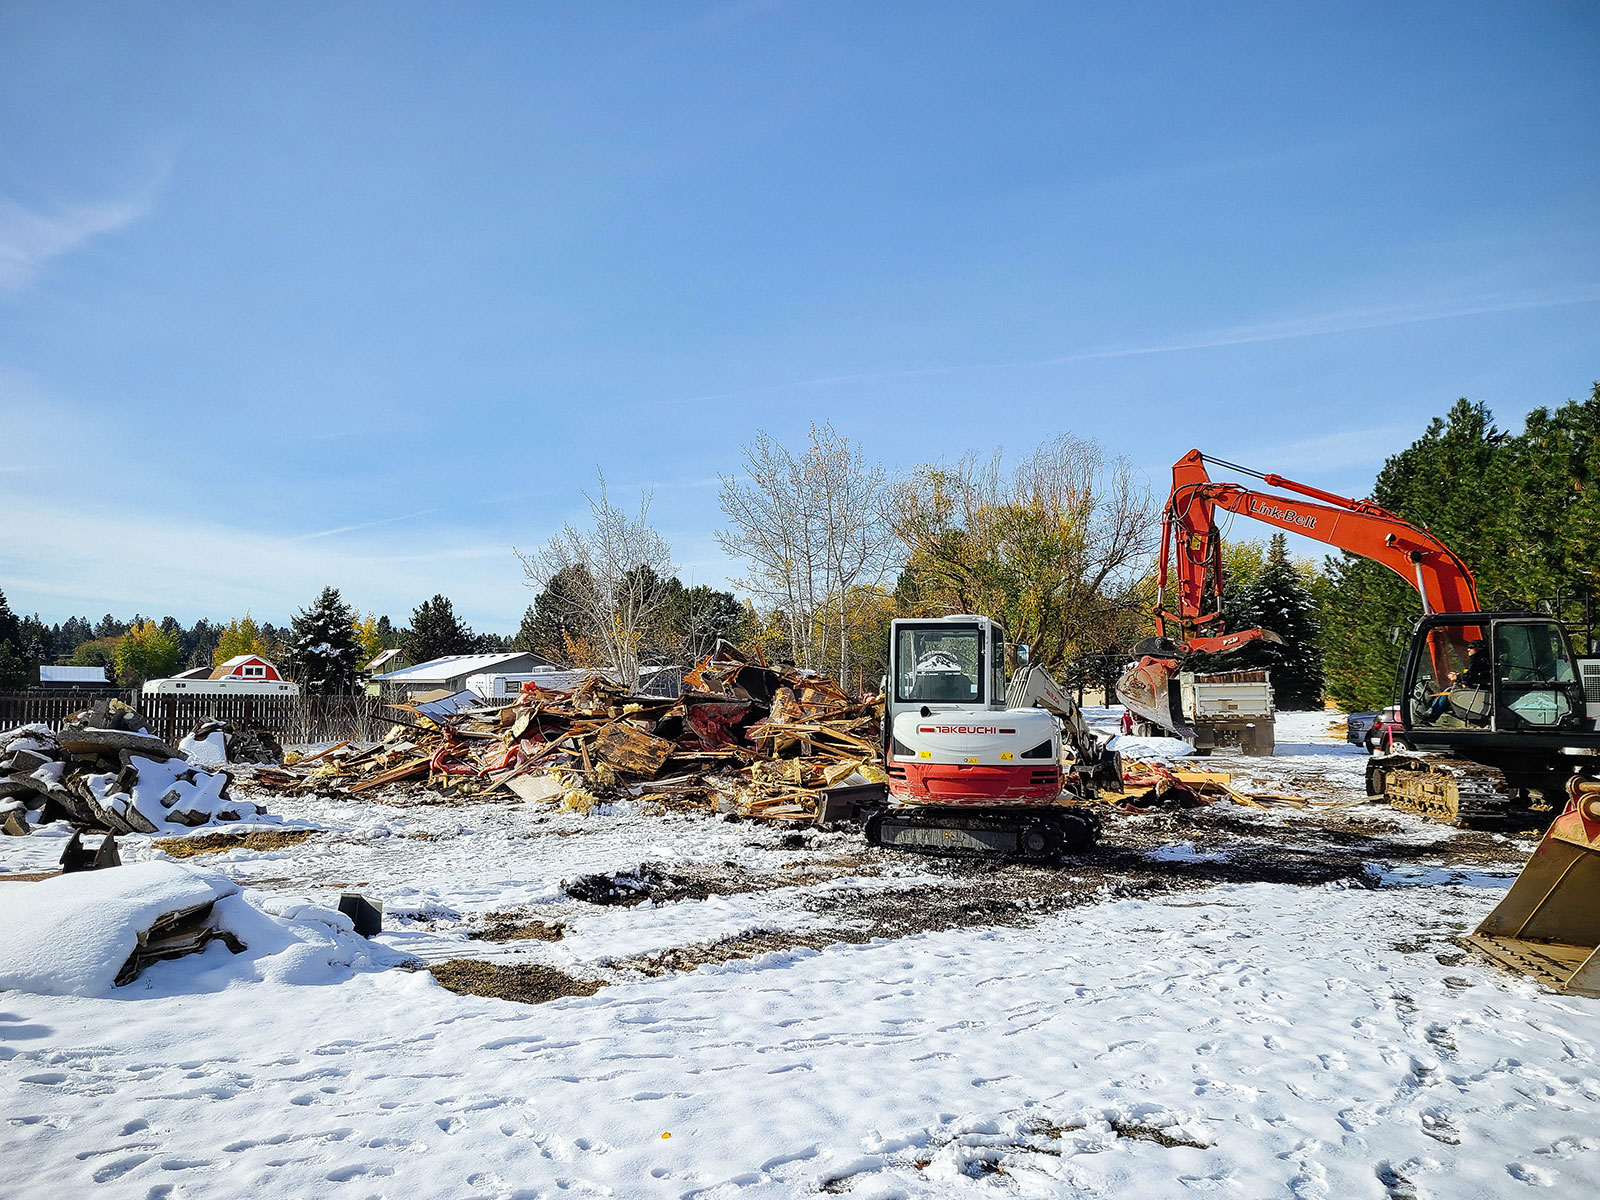 Excavators next to a pile of debris from a demolished home